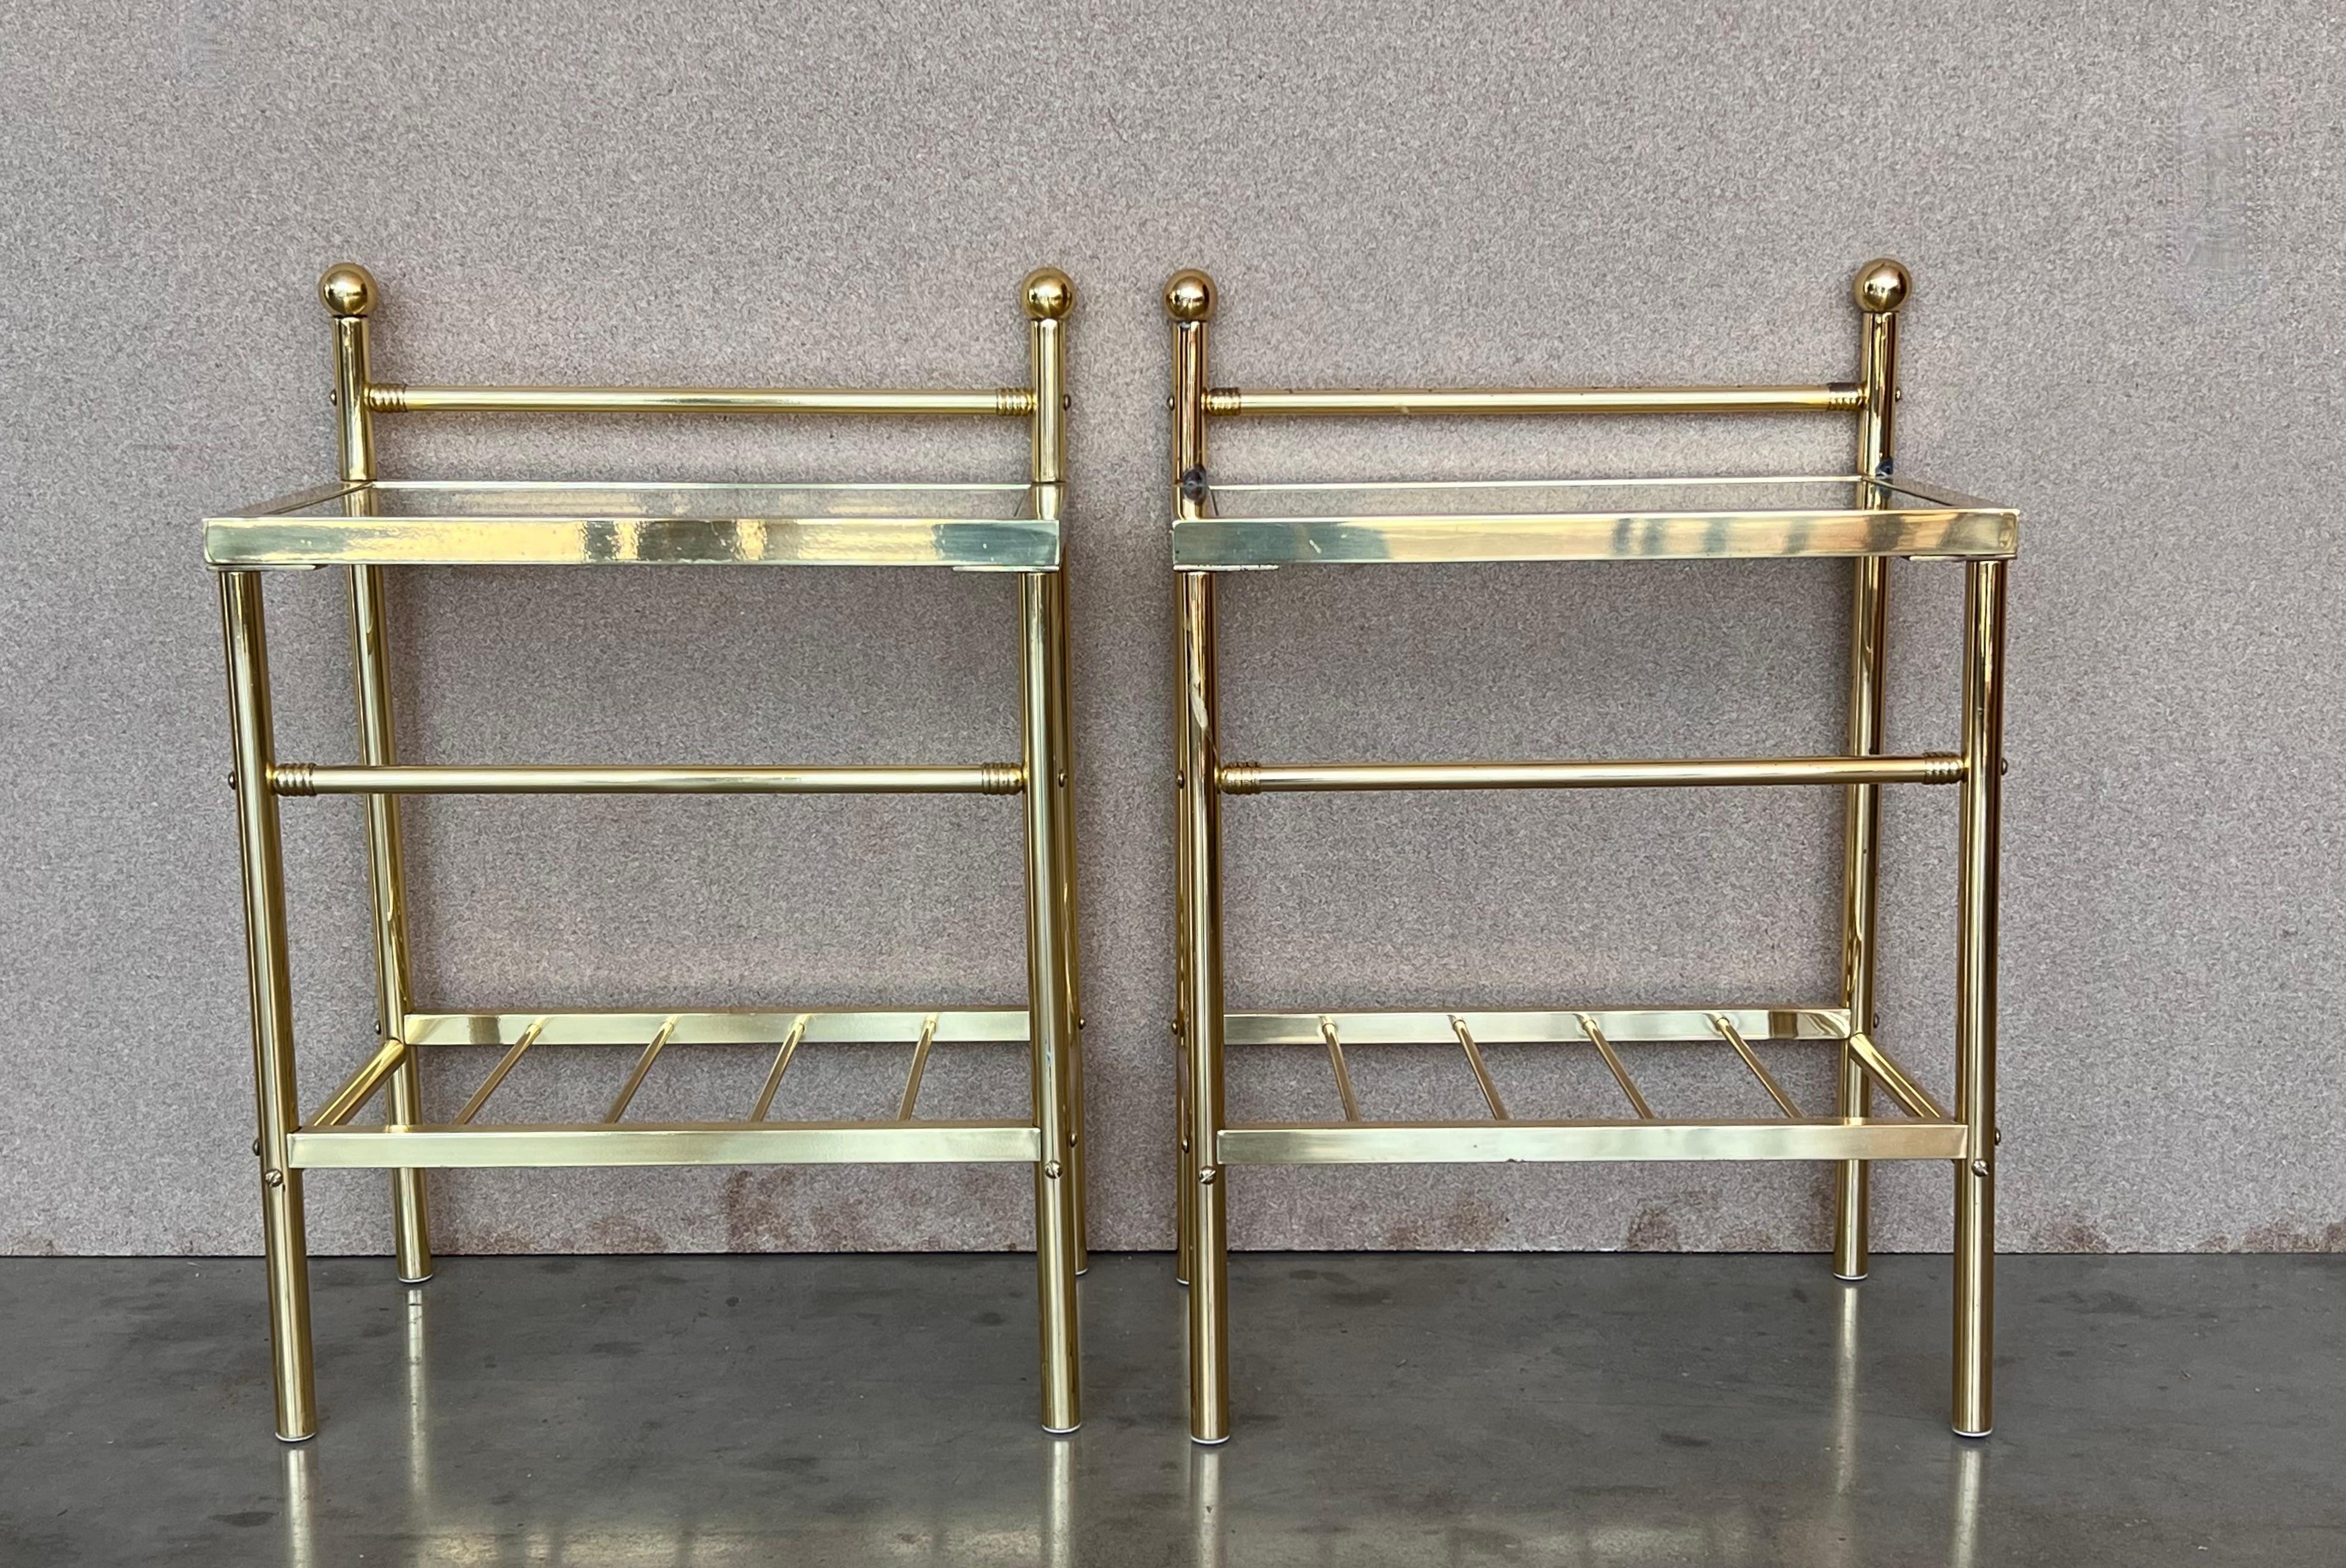 Pair of midcentury Italian two tier brass and glass nightstands with crest.
Simple tables with a low grid shelve and glass top. 

Height to the glass top :20.70in.